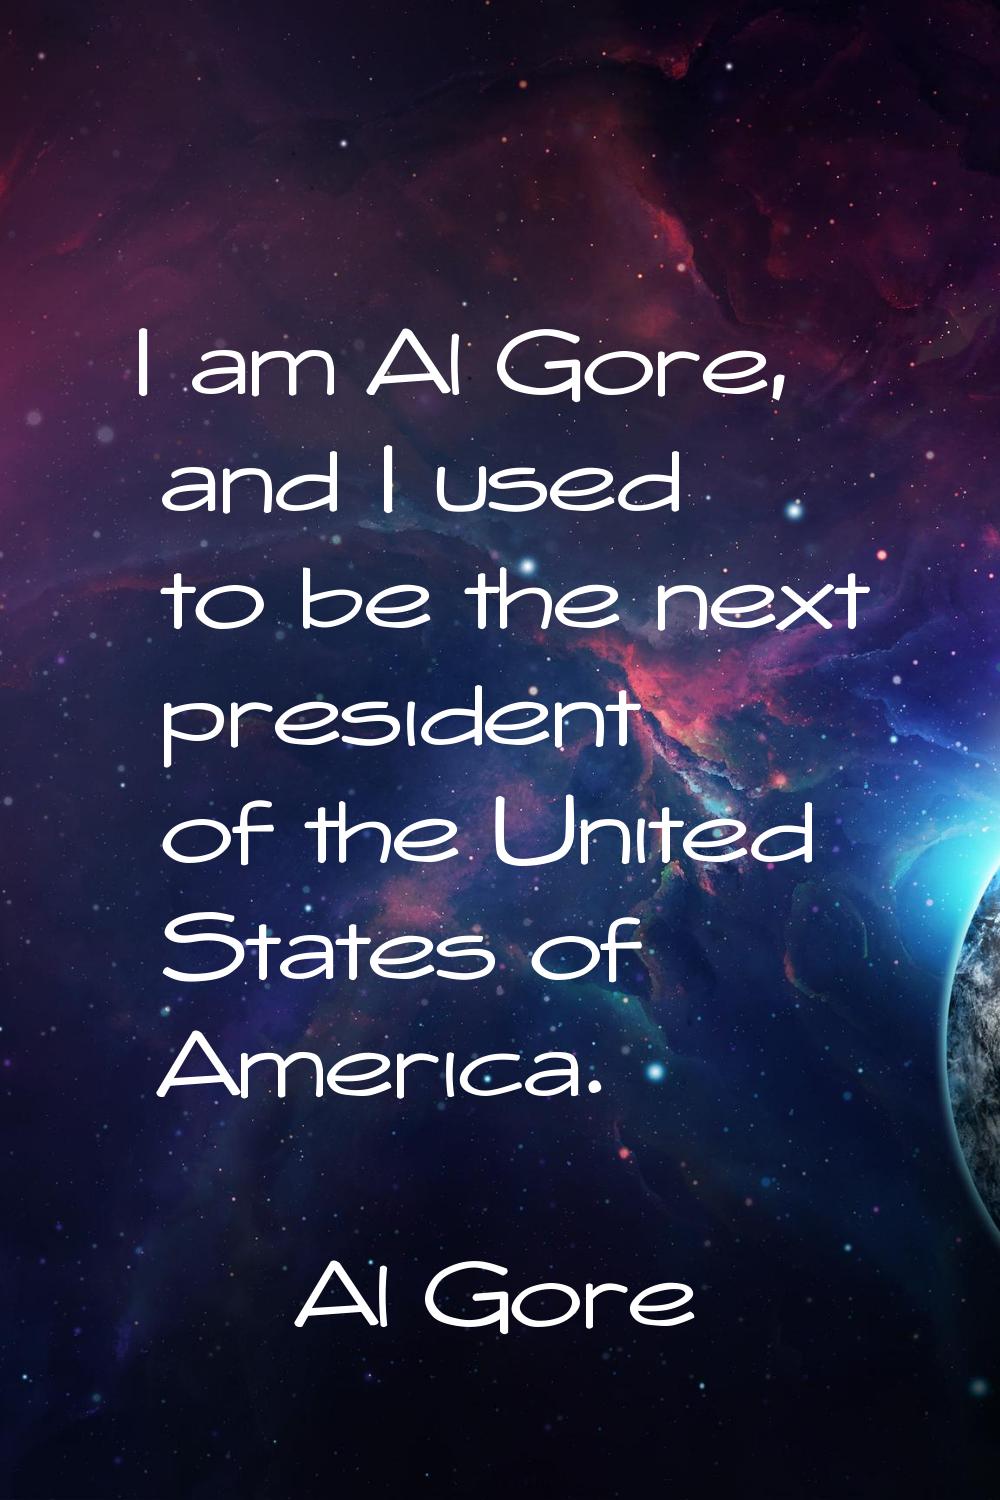 I am Al Gore, and I used to be the next president of the United States of America.